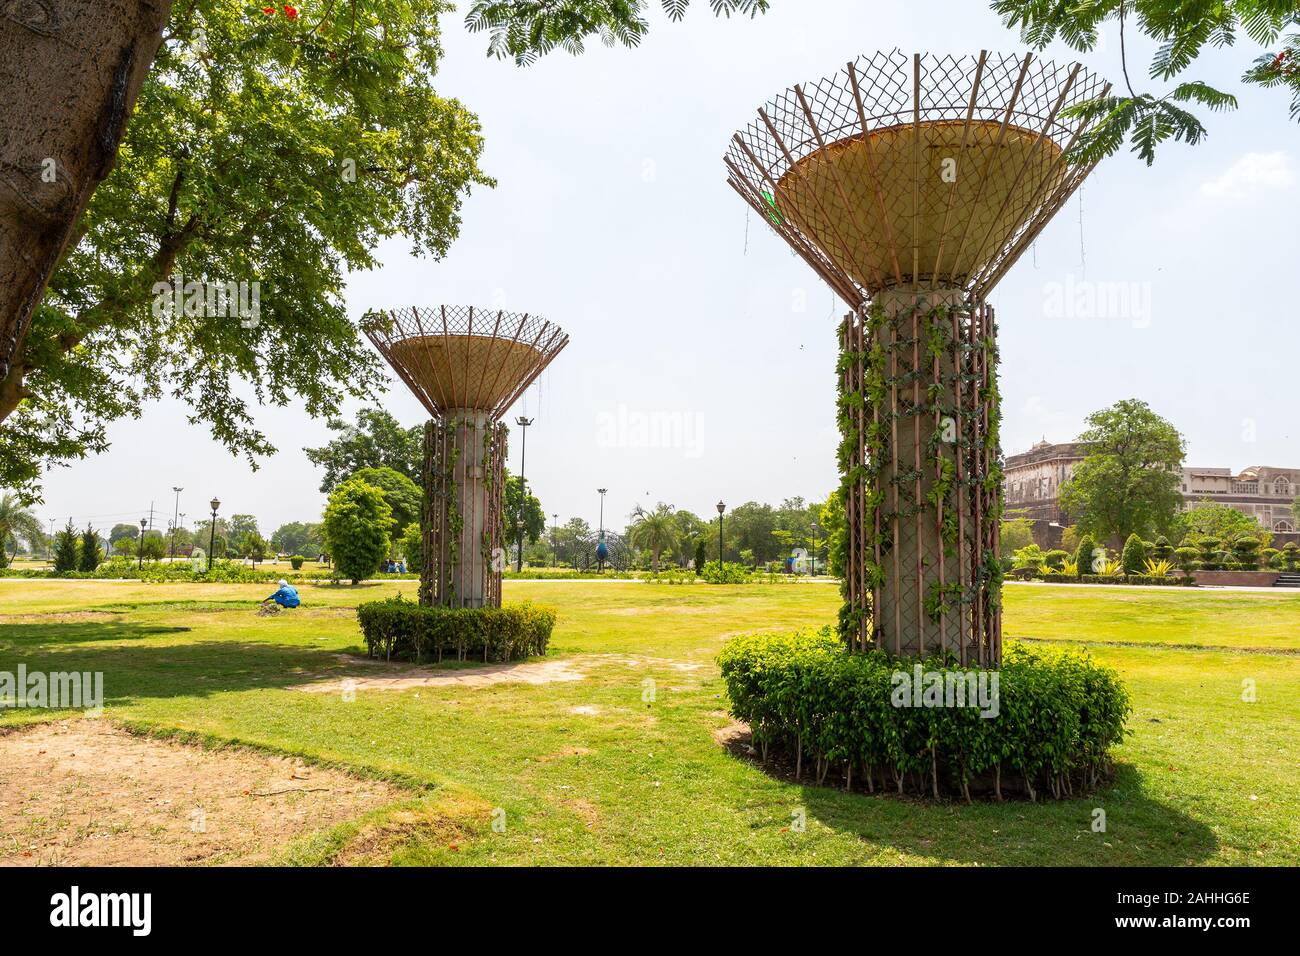 Lahore Iqbal Park Picturesque View of Two Pillars with Clipped Hedges on a Sunny Blue Sky Day Stock Photo